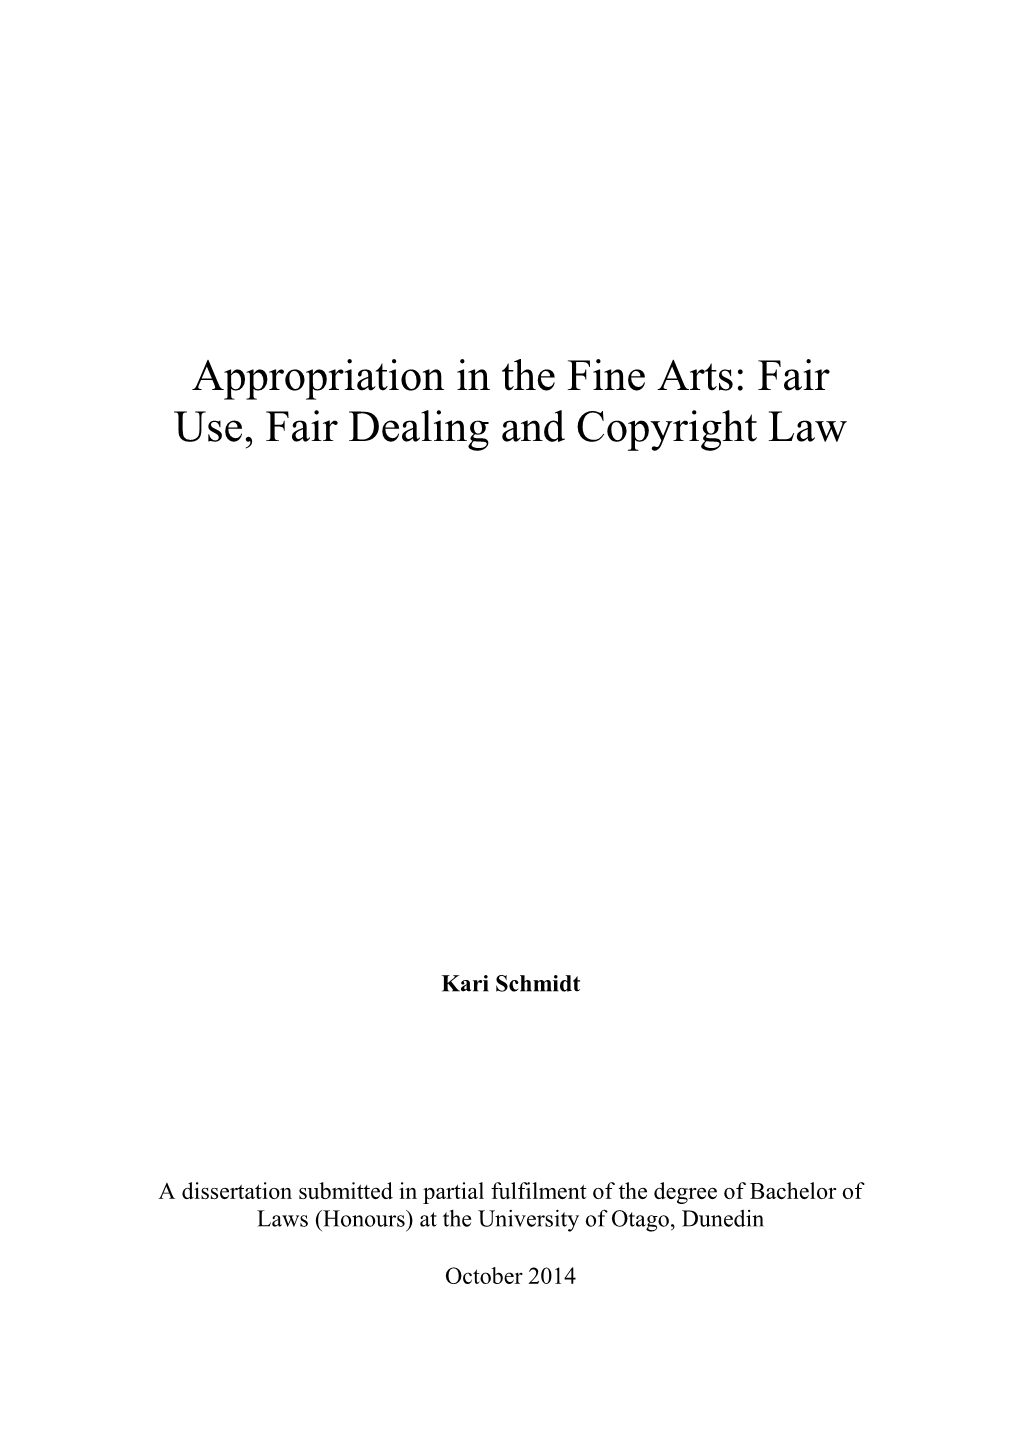 Appropriation in the Fine Arts: Fair Use, Fair Dealing and Copyright Law